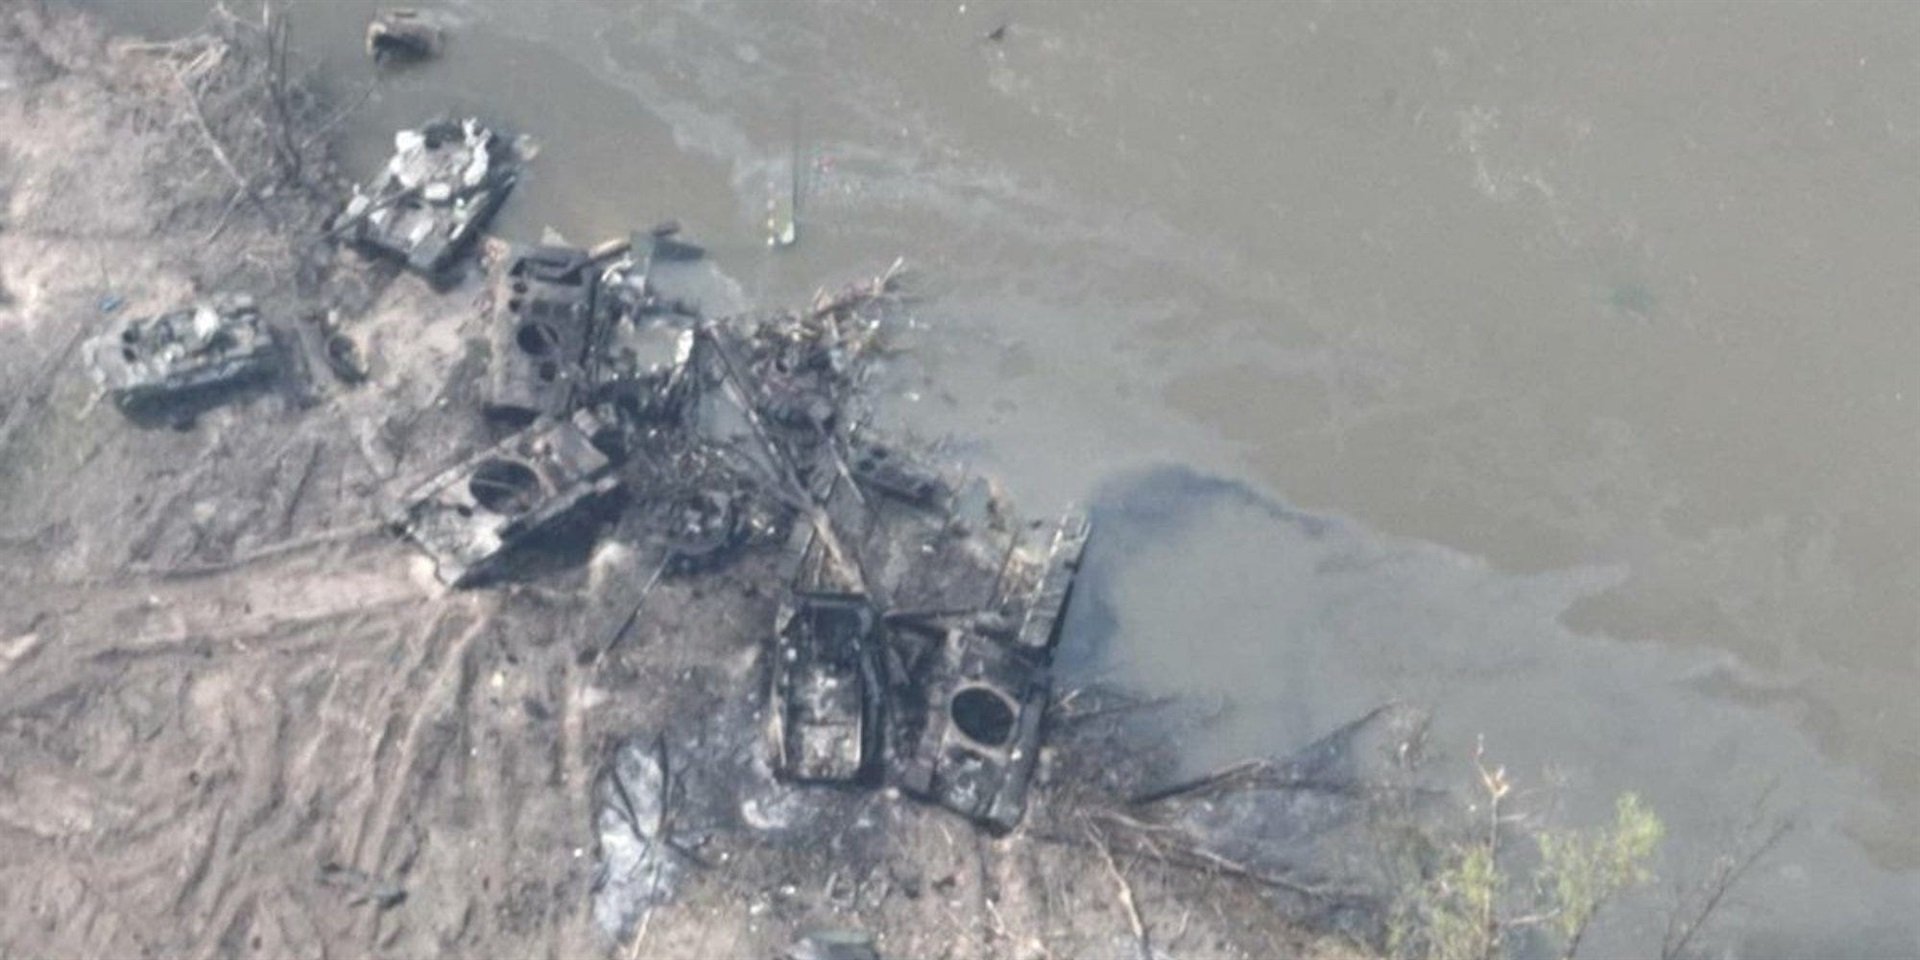 An image shared by Ukraine's department of defense, which it said shows Russian equipment destroyed at the Siverskyi Donets River.